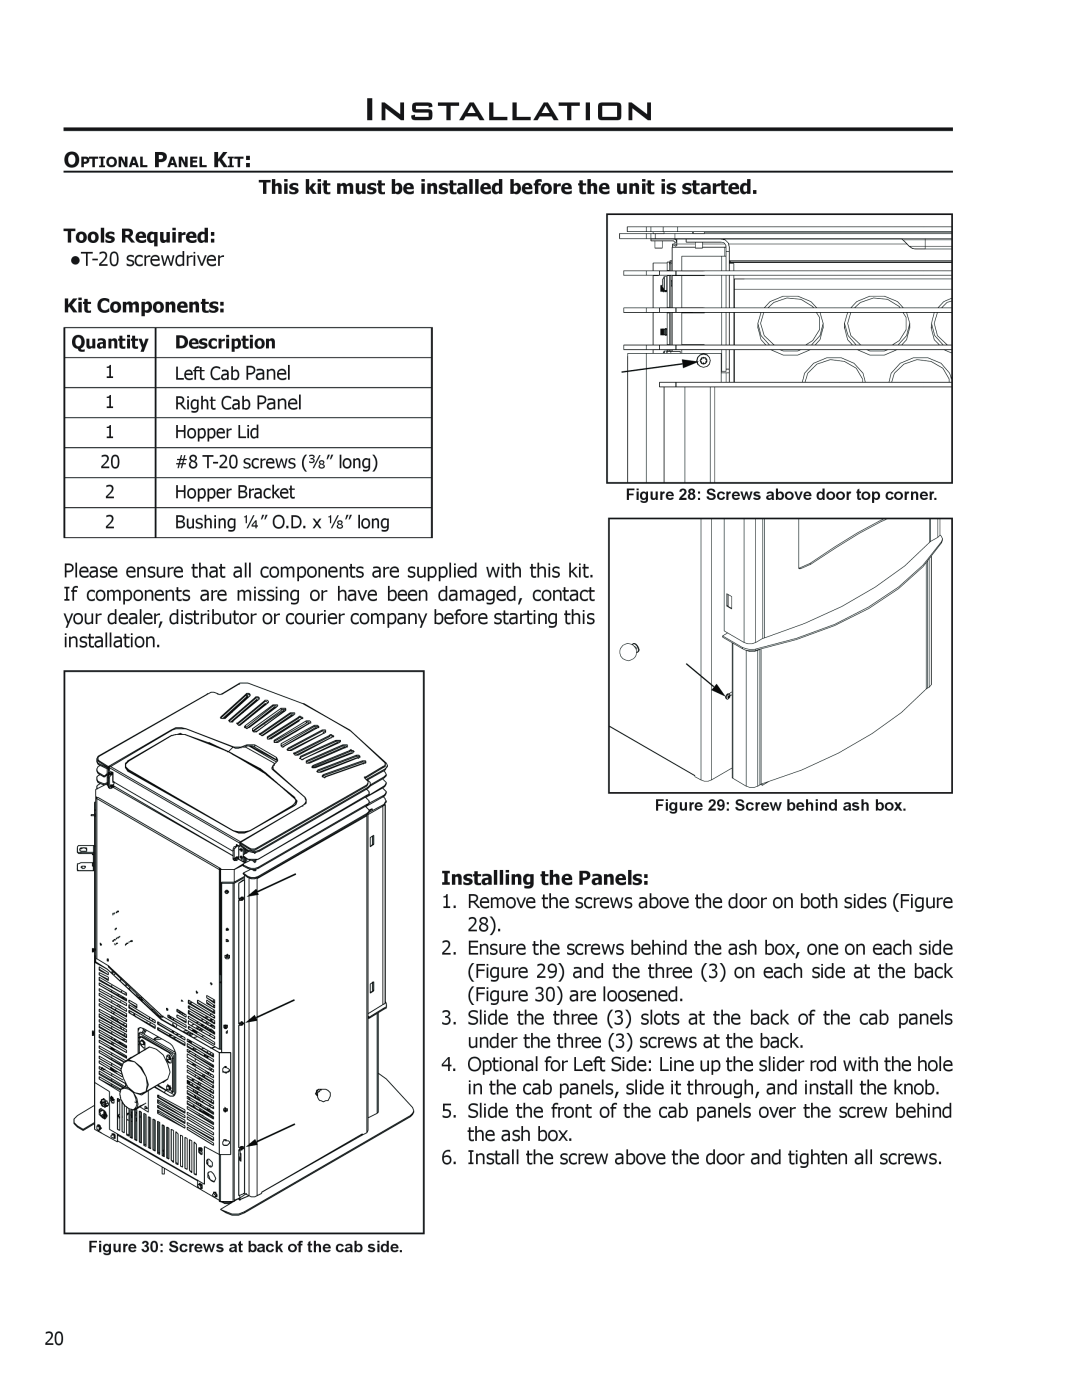 Mega Catch Mini technical manual Installation, Tools Required, Kit Components, Installing the Panels 